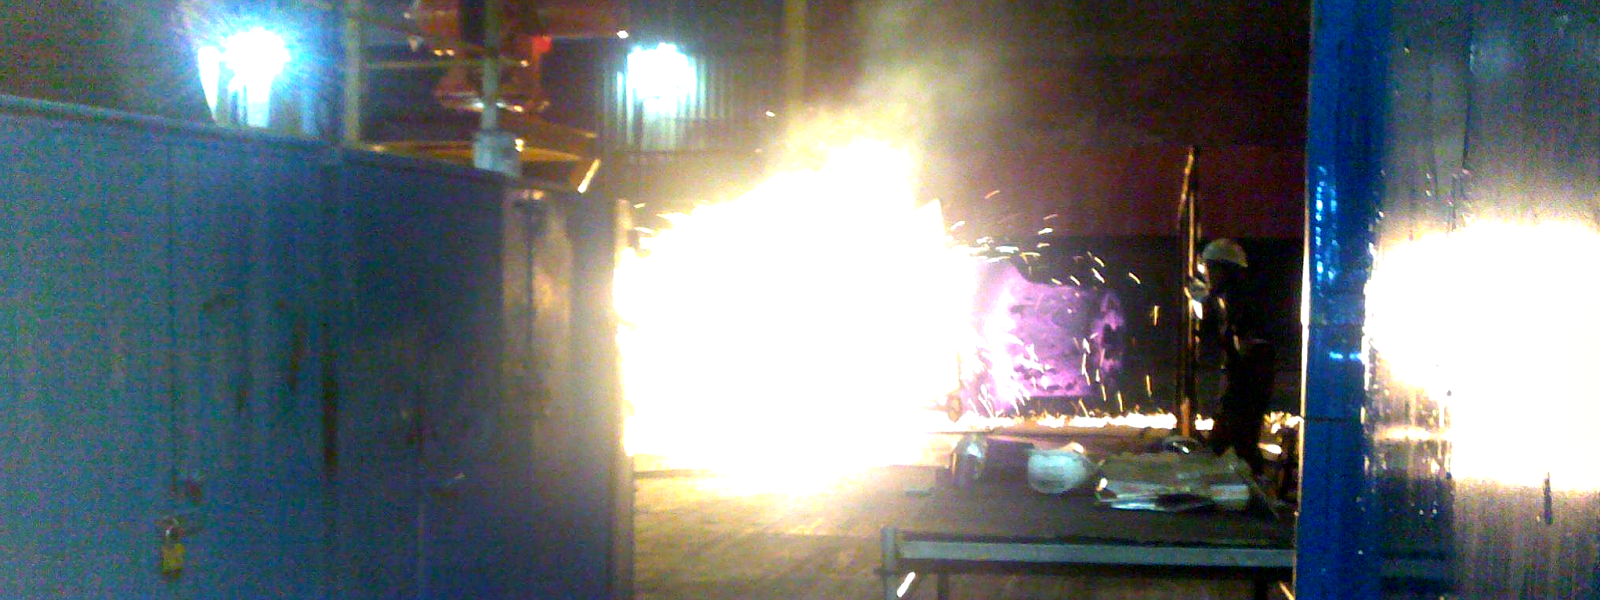 Tizi pictures of forging in Sheffield